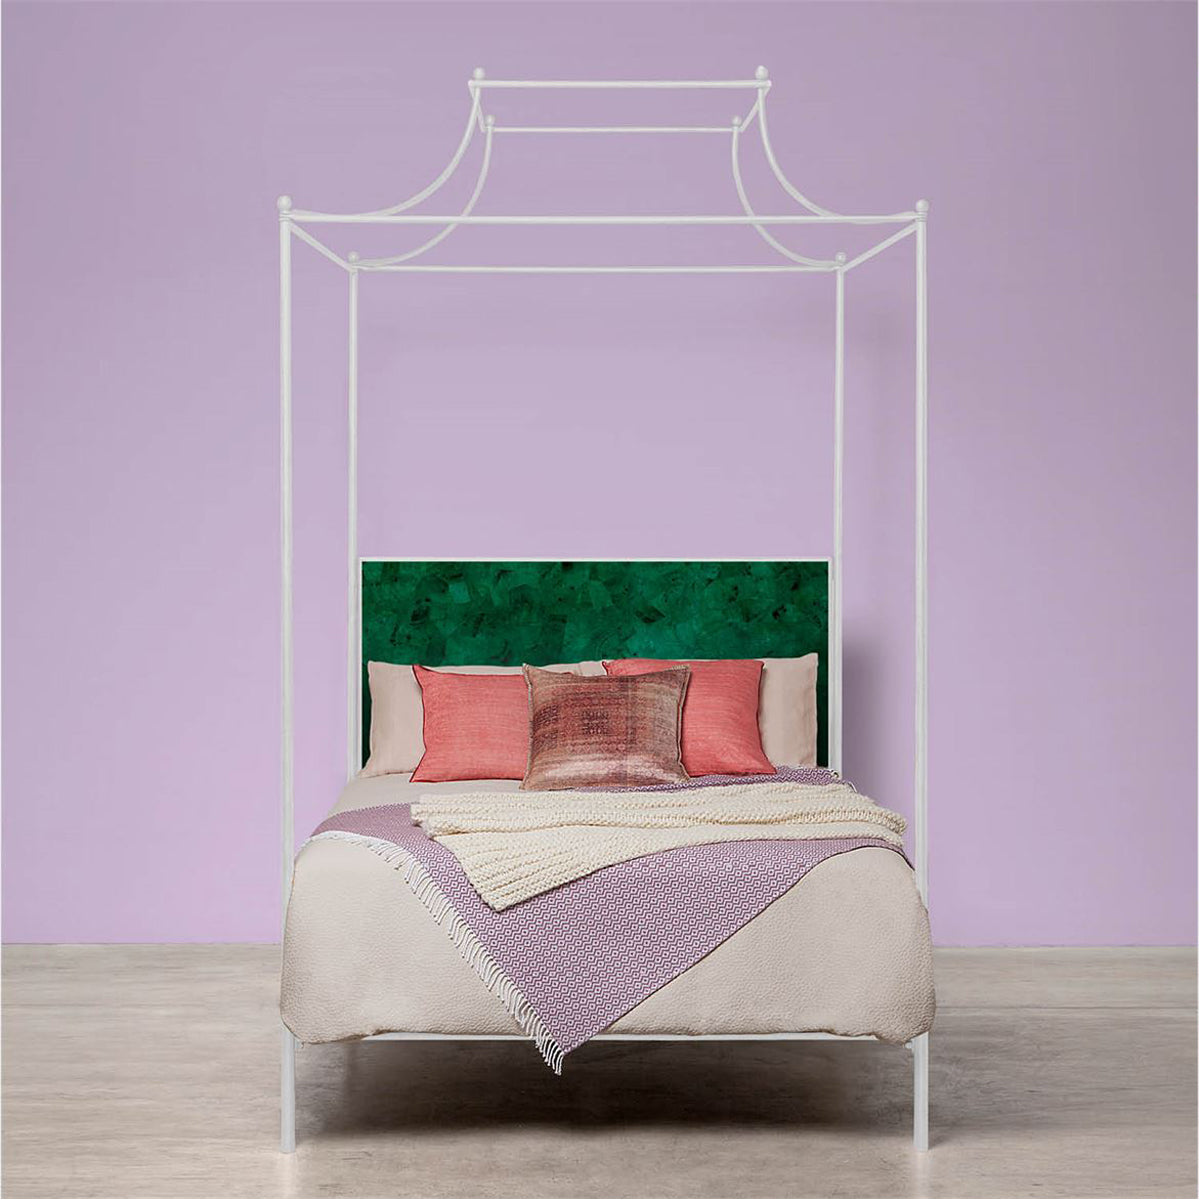 Made Goods Janelle Scalloped Iron Canopy Bed in Faux Shagreen